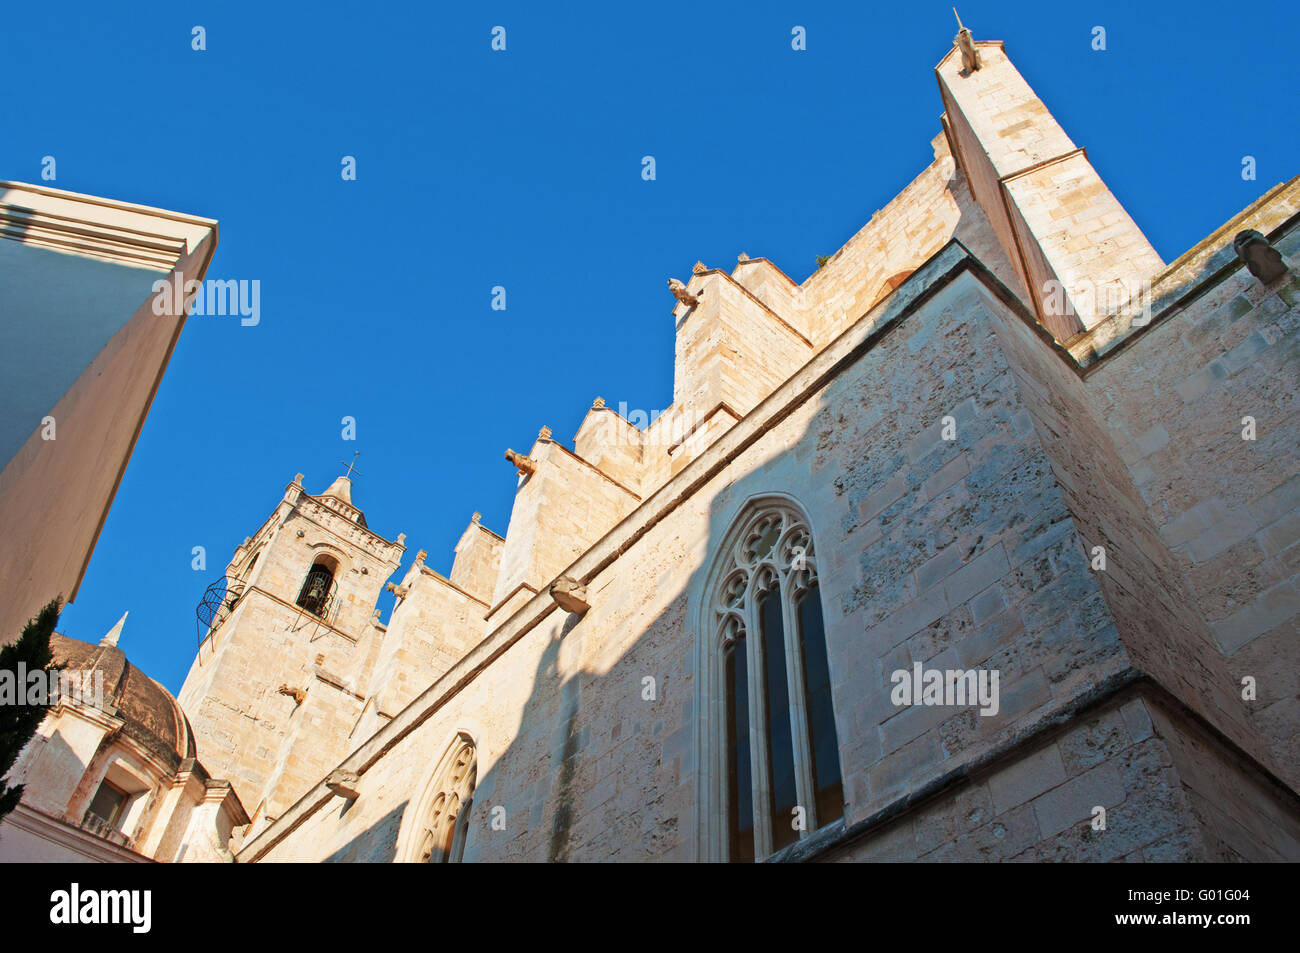 Menorca: details of the Cathedral Basilica of Ciutadella, the Church of Saint Mary, constructed in 1287 on the site of an old mosque Stock Photo